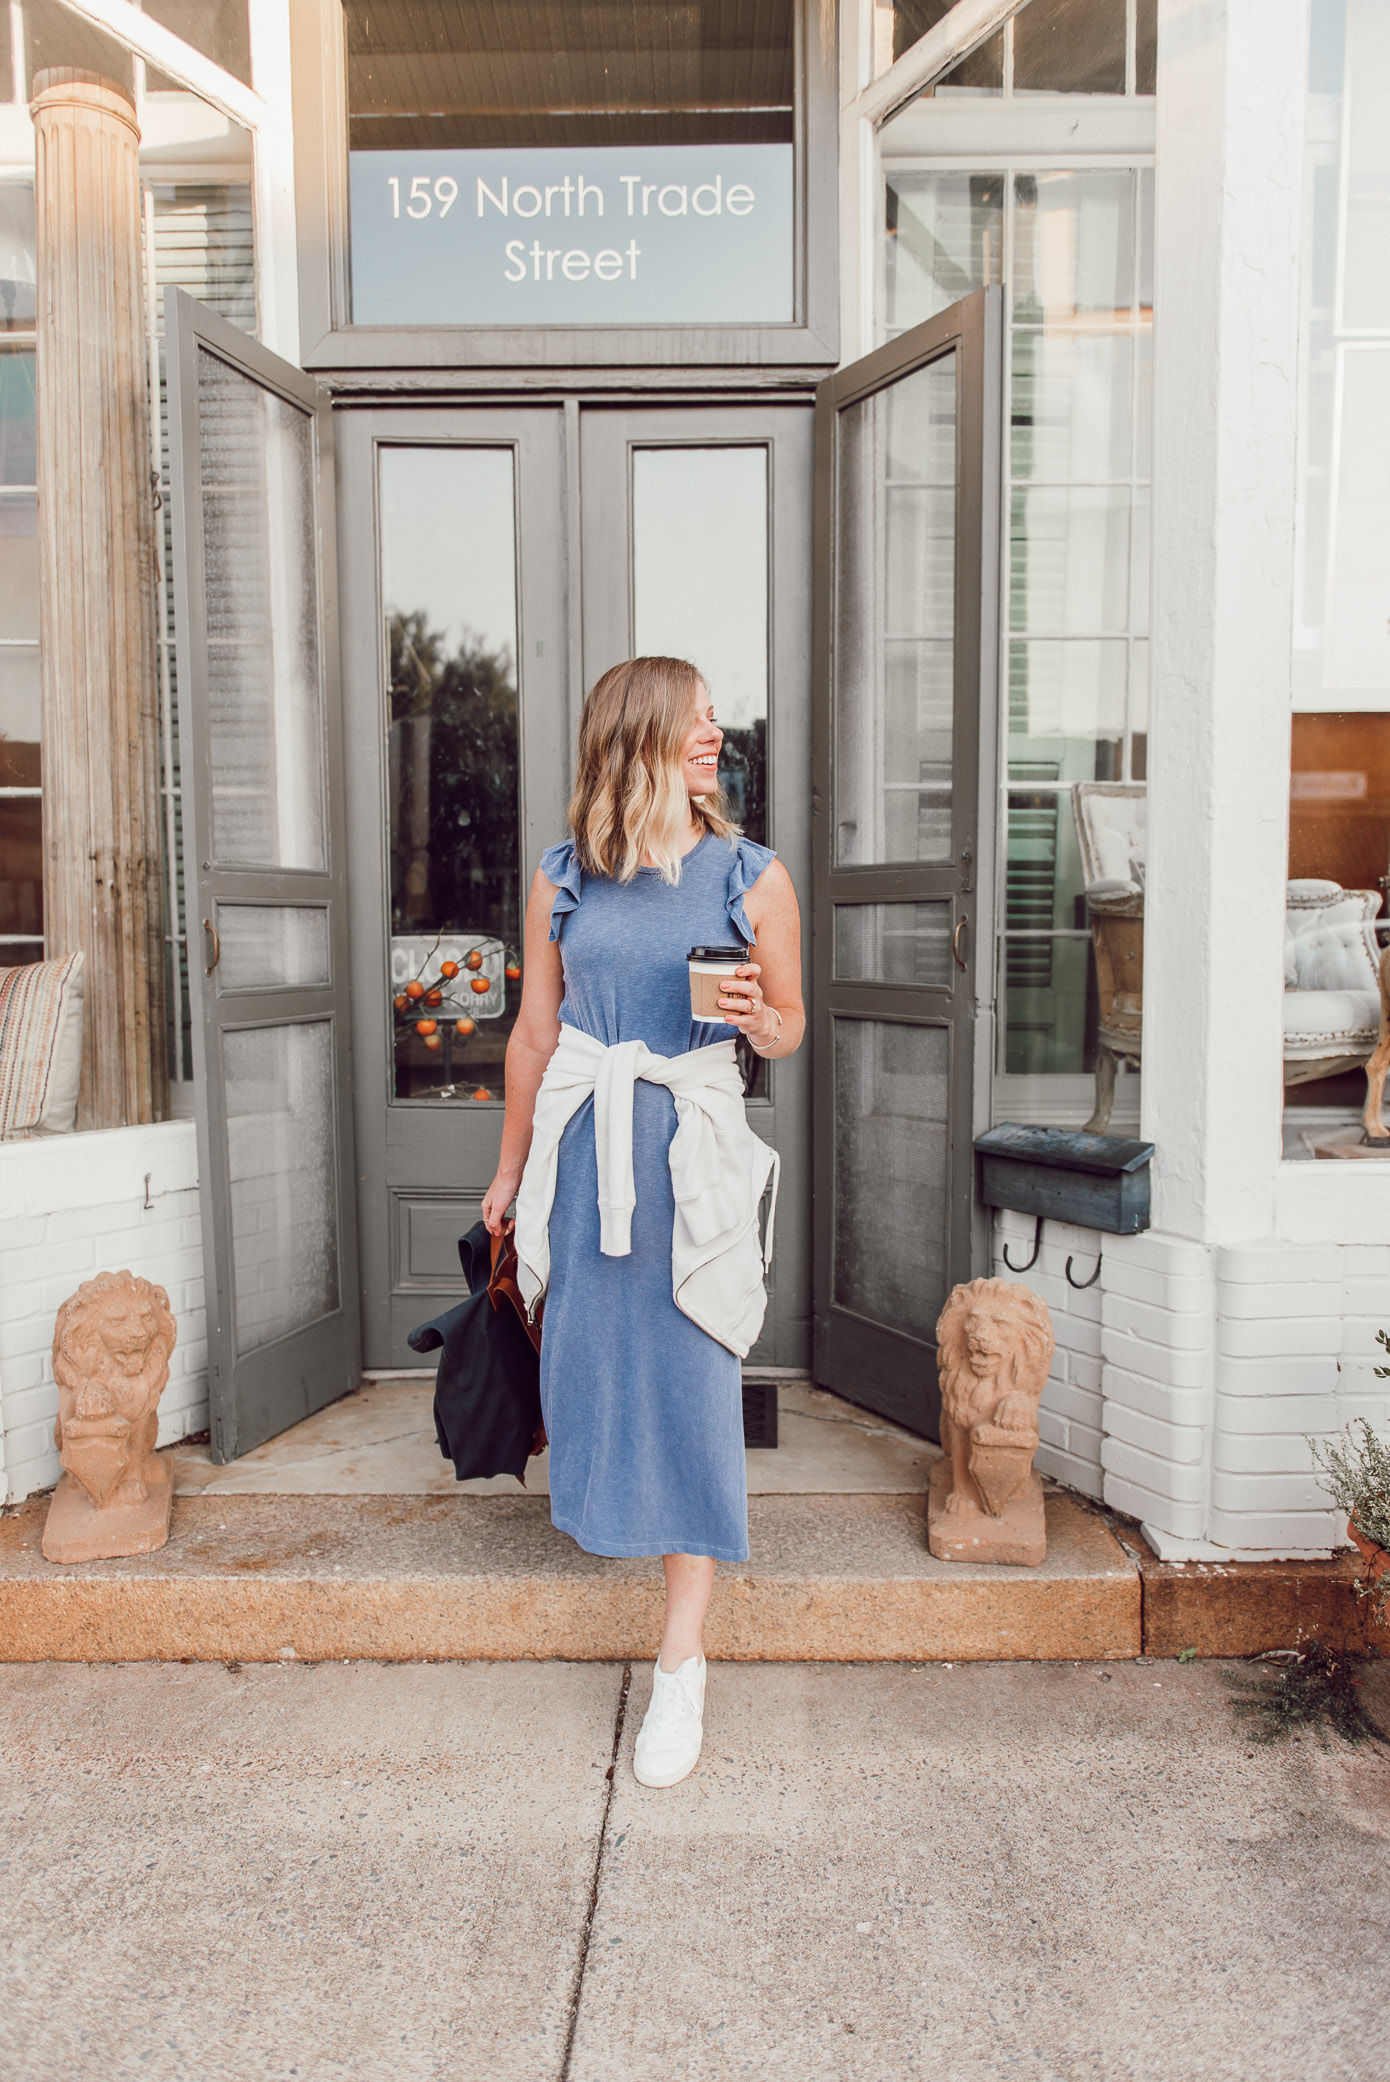 T-Shirt Midi Dress Styled Two Ways | One Dress Two Seasons - How to Style for Summer and then into the Fall Season | Louella Reese